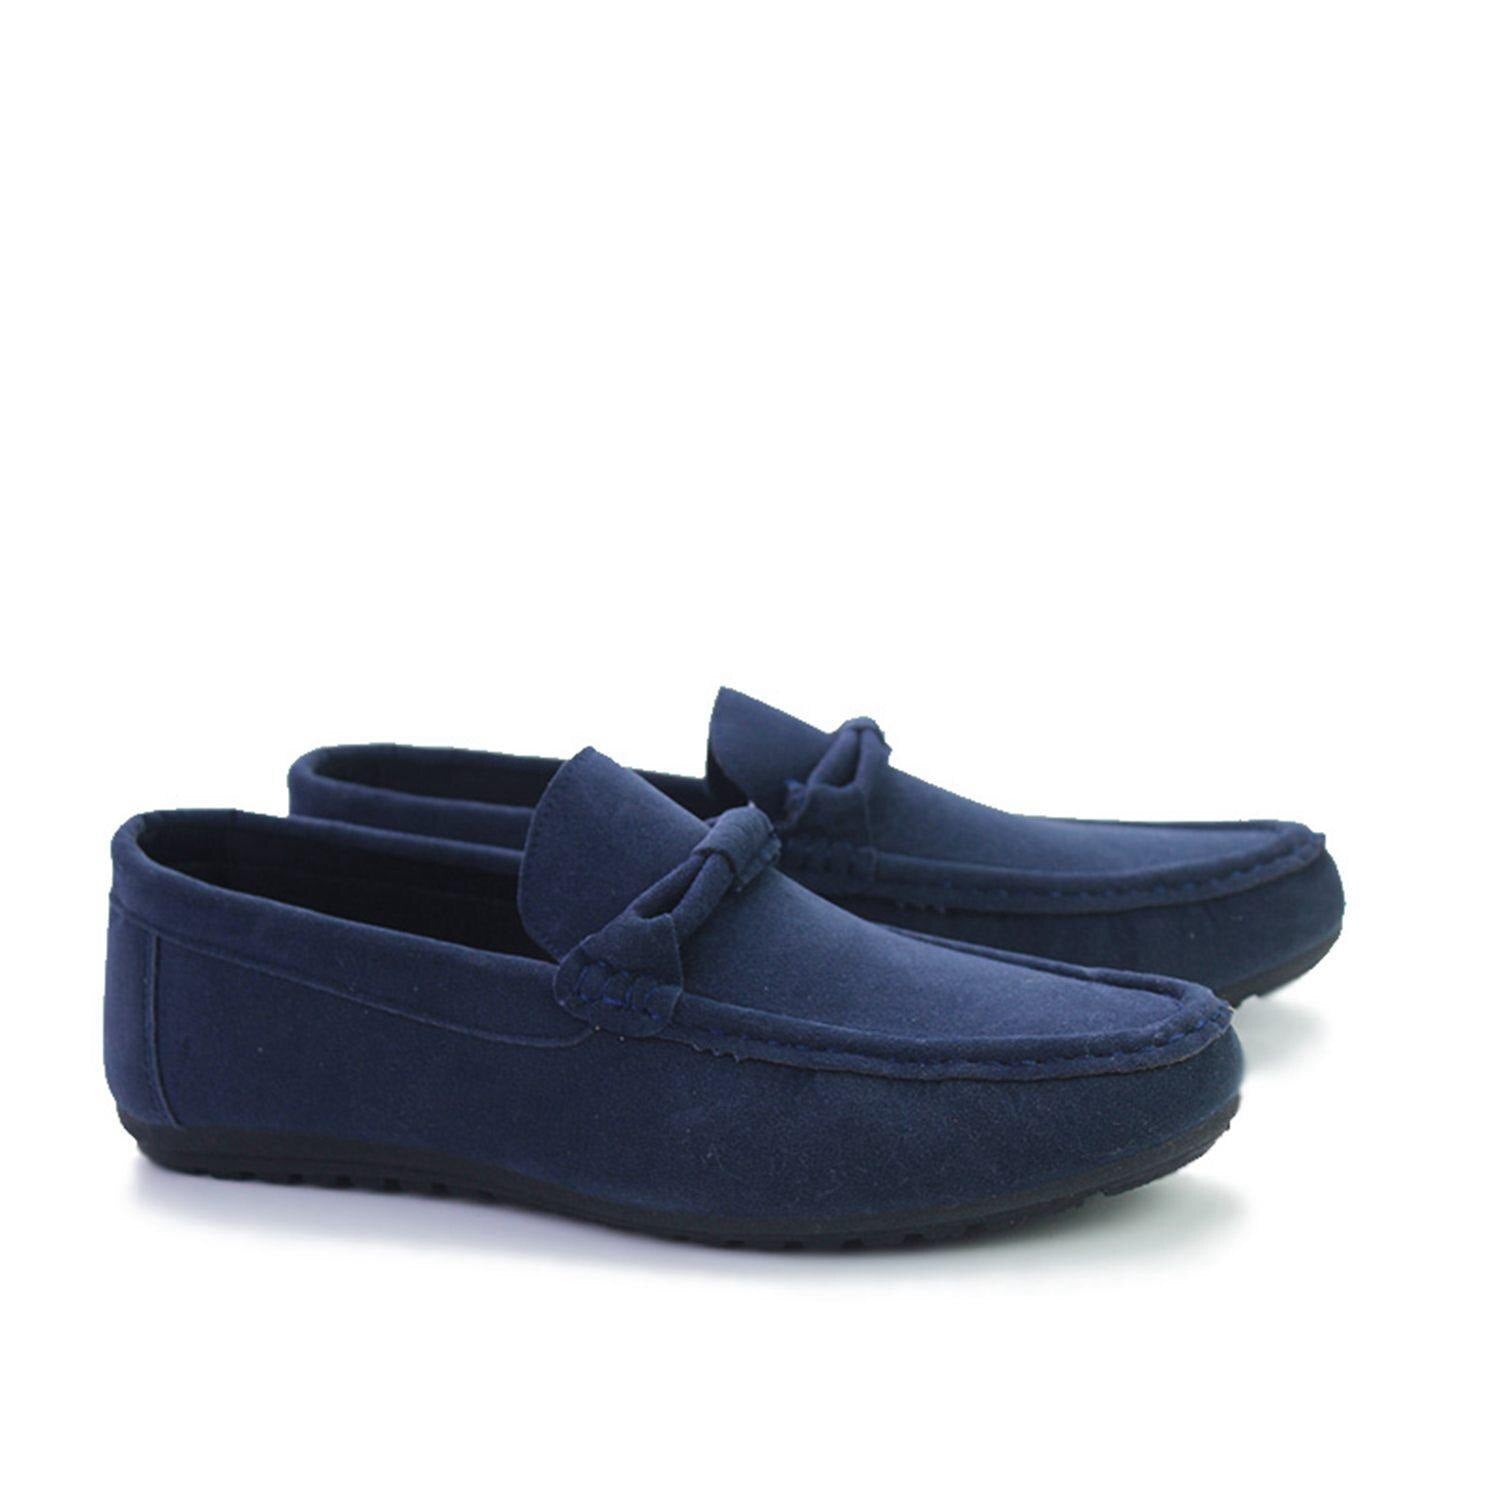 Suede Leather Men Flats 2018 New Soft Men Casual Shoes High Quality Men Loafers Flats Gommino Driving Shoes - ebowsos